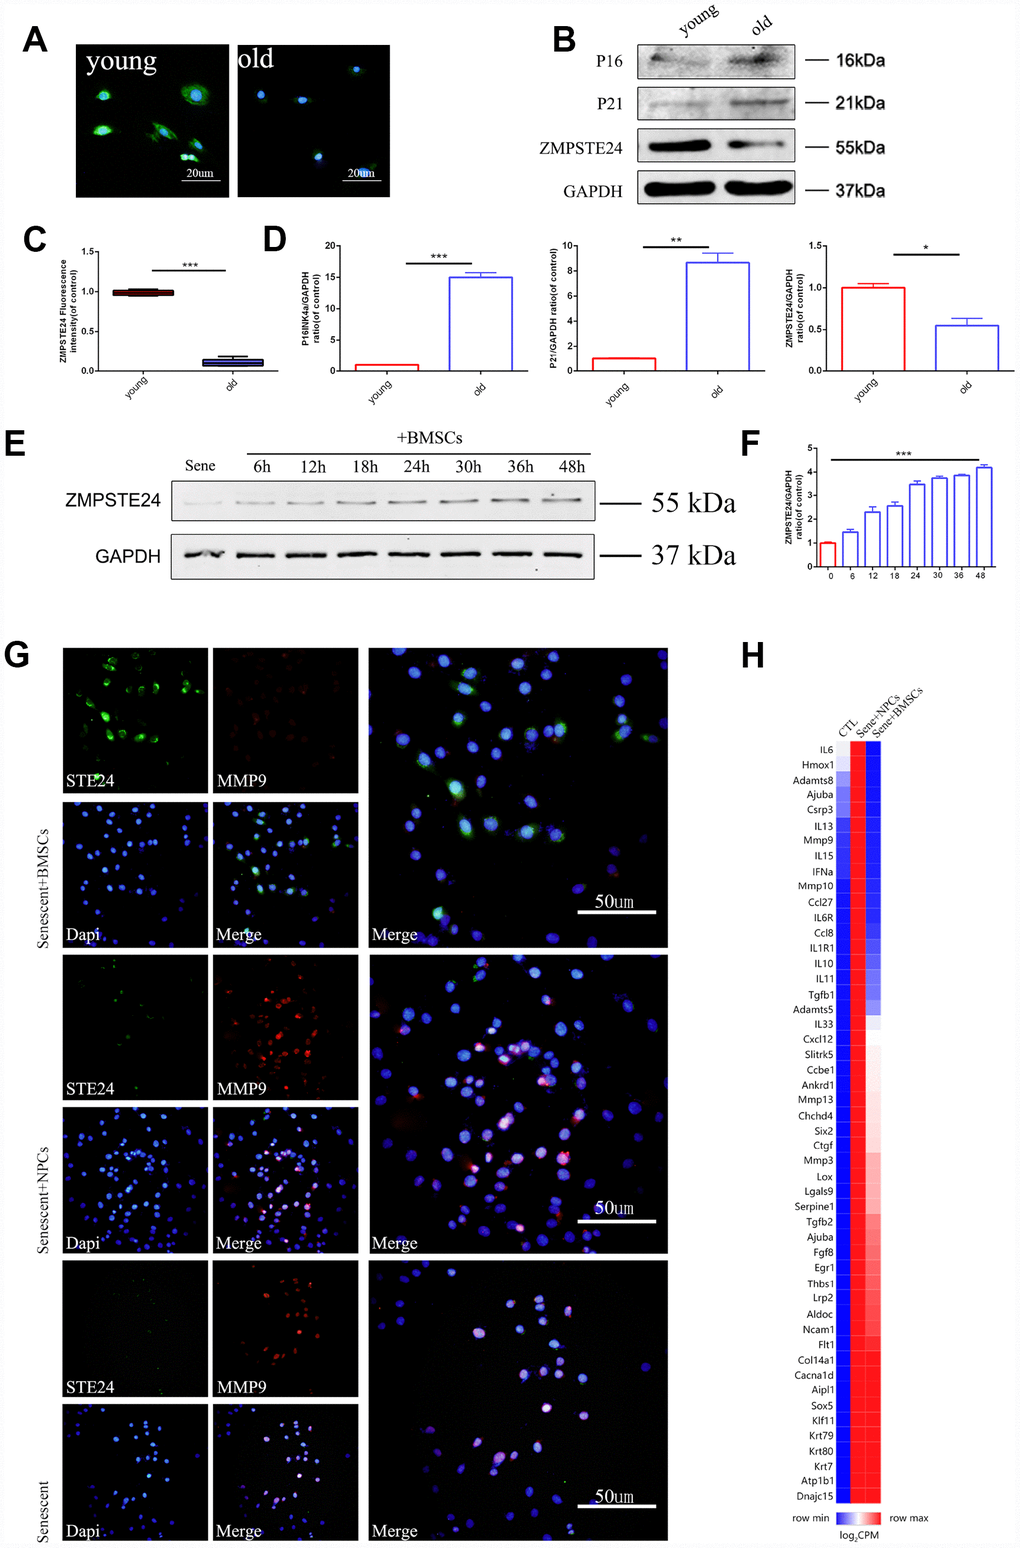 3D BMSCs coculture activates ZMPSTE24 signaling. (A–C) Immunofluorescence staining of ZMPSTE24 between young (3 weeks) and old (24 months) rats, scale bar, 50um. Fluorescence intensities were determined by using Image J software. (B–D) Protein expression of P16, P21 and ZMPSTE24 were visualized by western blot and quantified by Image J. (E–F) Protein expression of ZMPSTE24 during coculture was visualized by western blot and quantified by Image J. (G) Immunofluorescence staining of ZMPSTE24 and MMP9 in NP cells between Sene, Sene +NPCs and Sene +BMSCs groups. n=5. Scale bar=50um. (H) Heat map representation of SASP (senescence-associated secretory phenotype) genes between CTL, Sene +NPCs and Sene +BMSCs groups. n=3 biological replicates. Values represent means±S.D. Significant differences between different groups are indicated as *P 